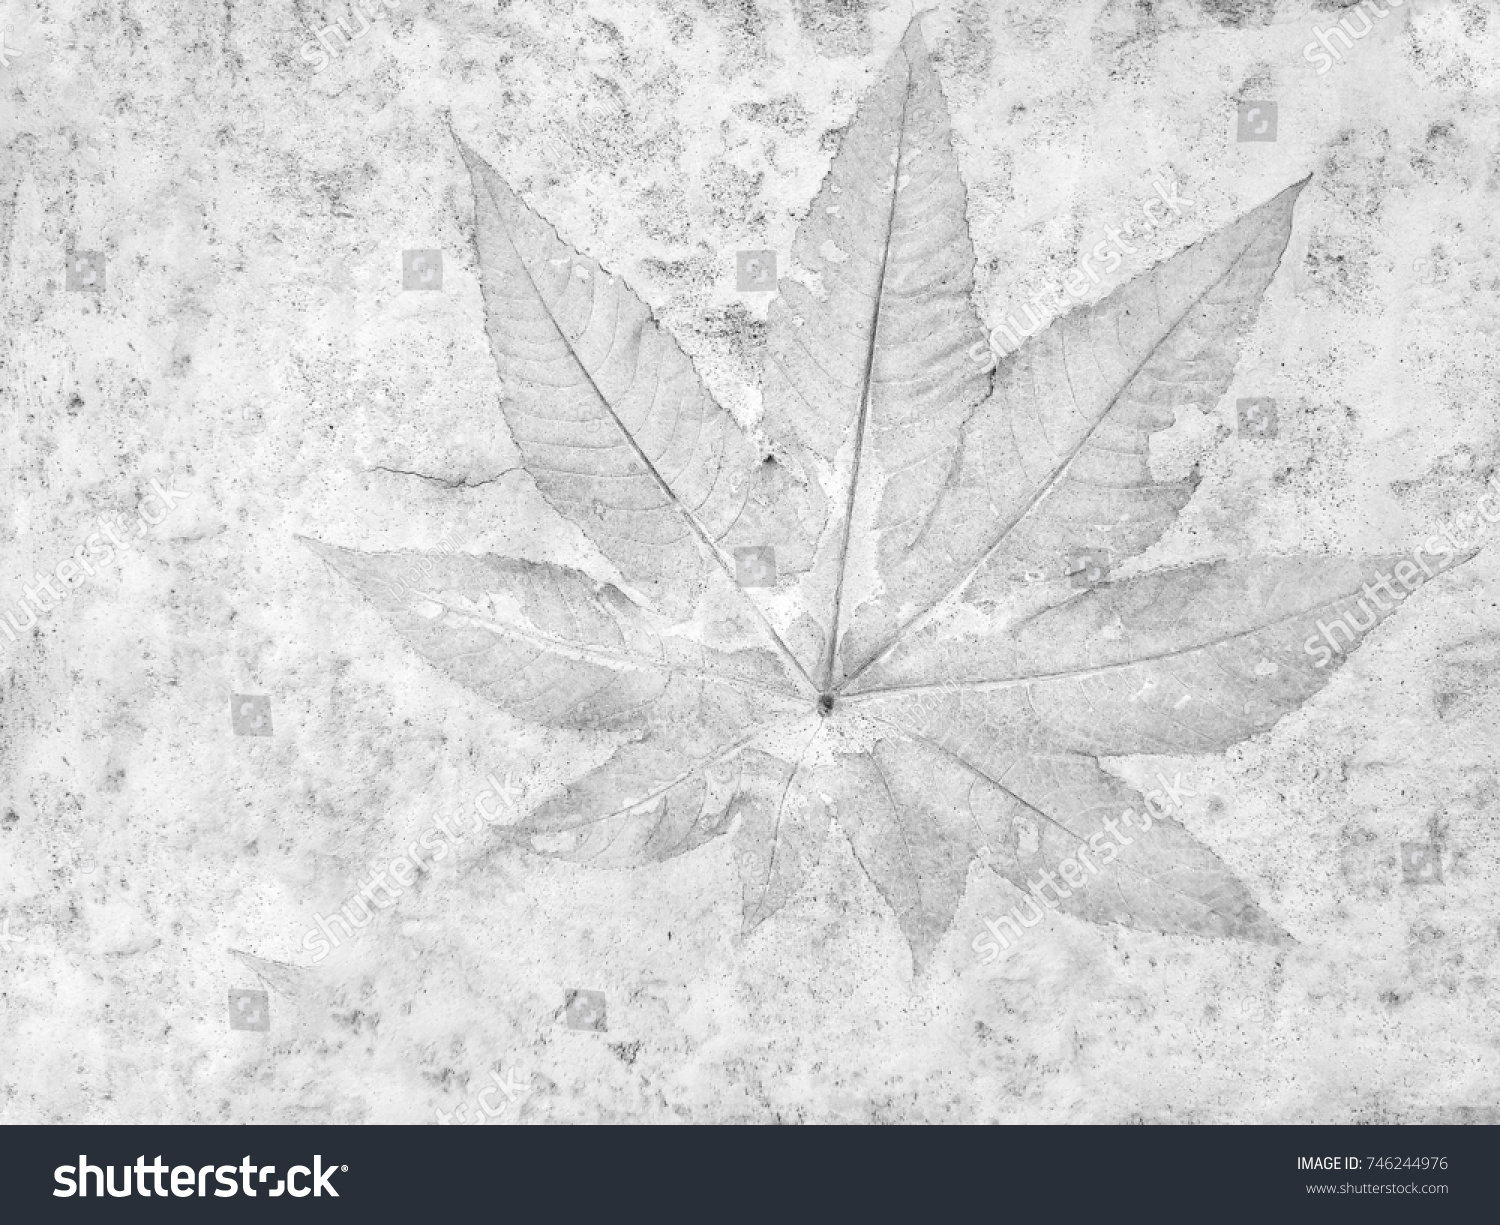 The leaf imprint on the cement floor background #746244976